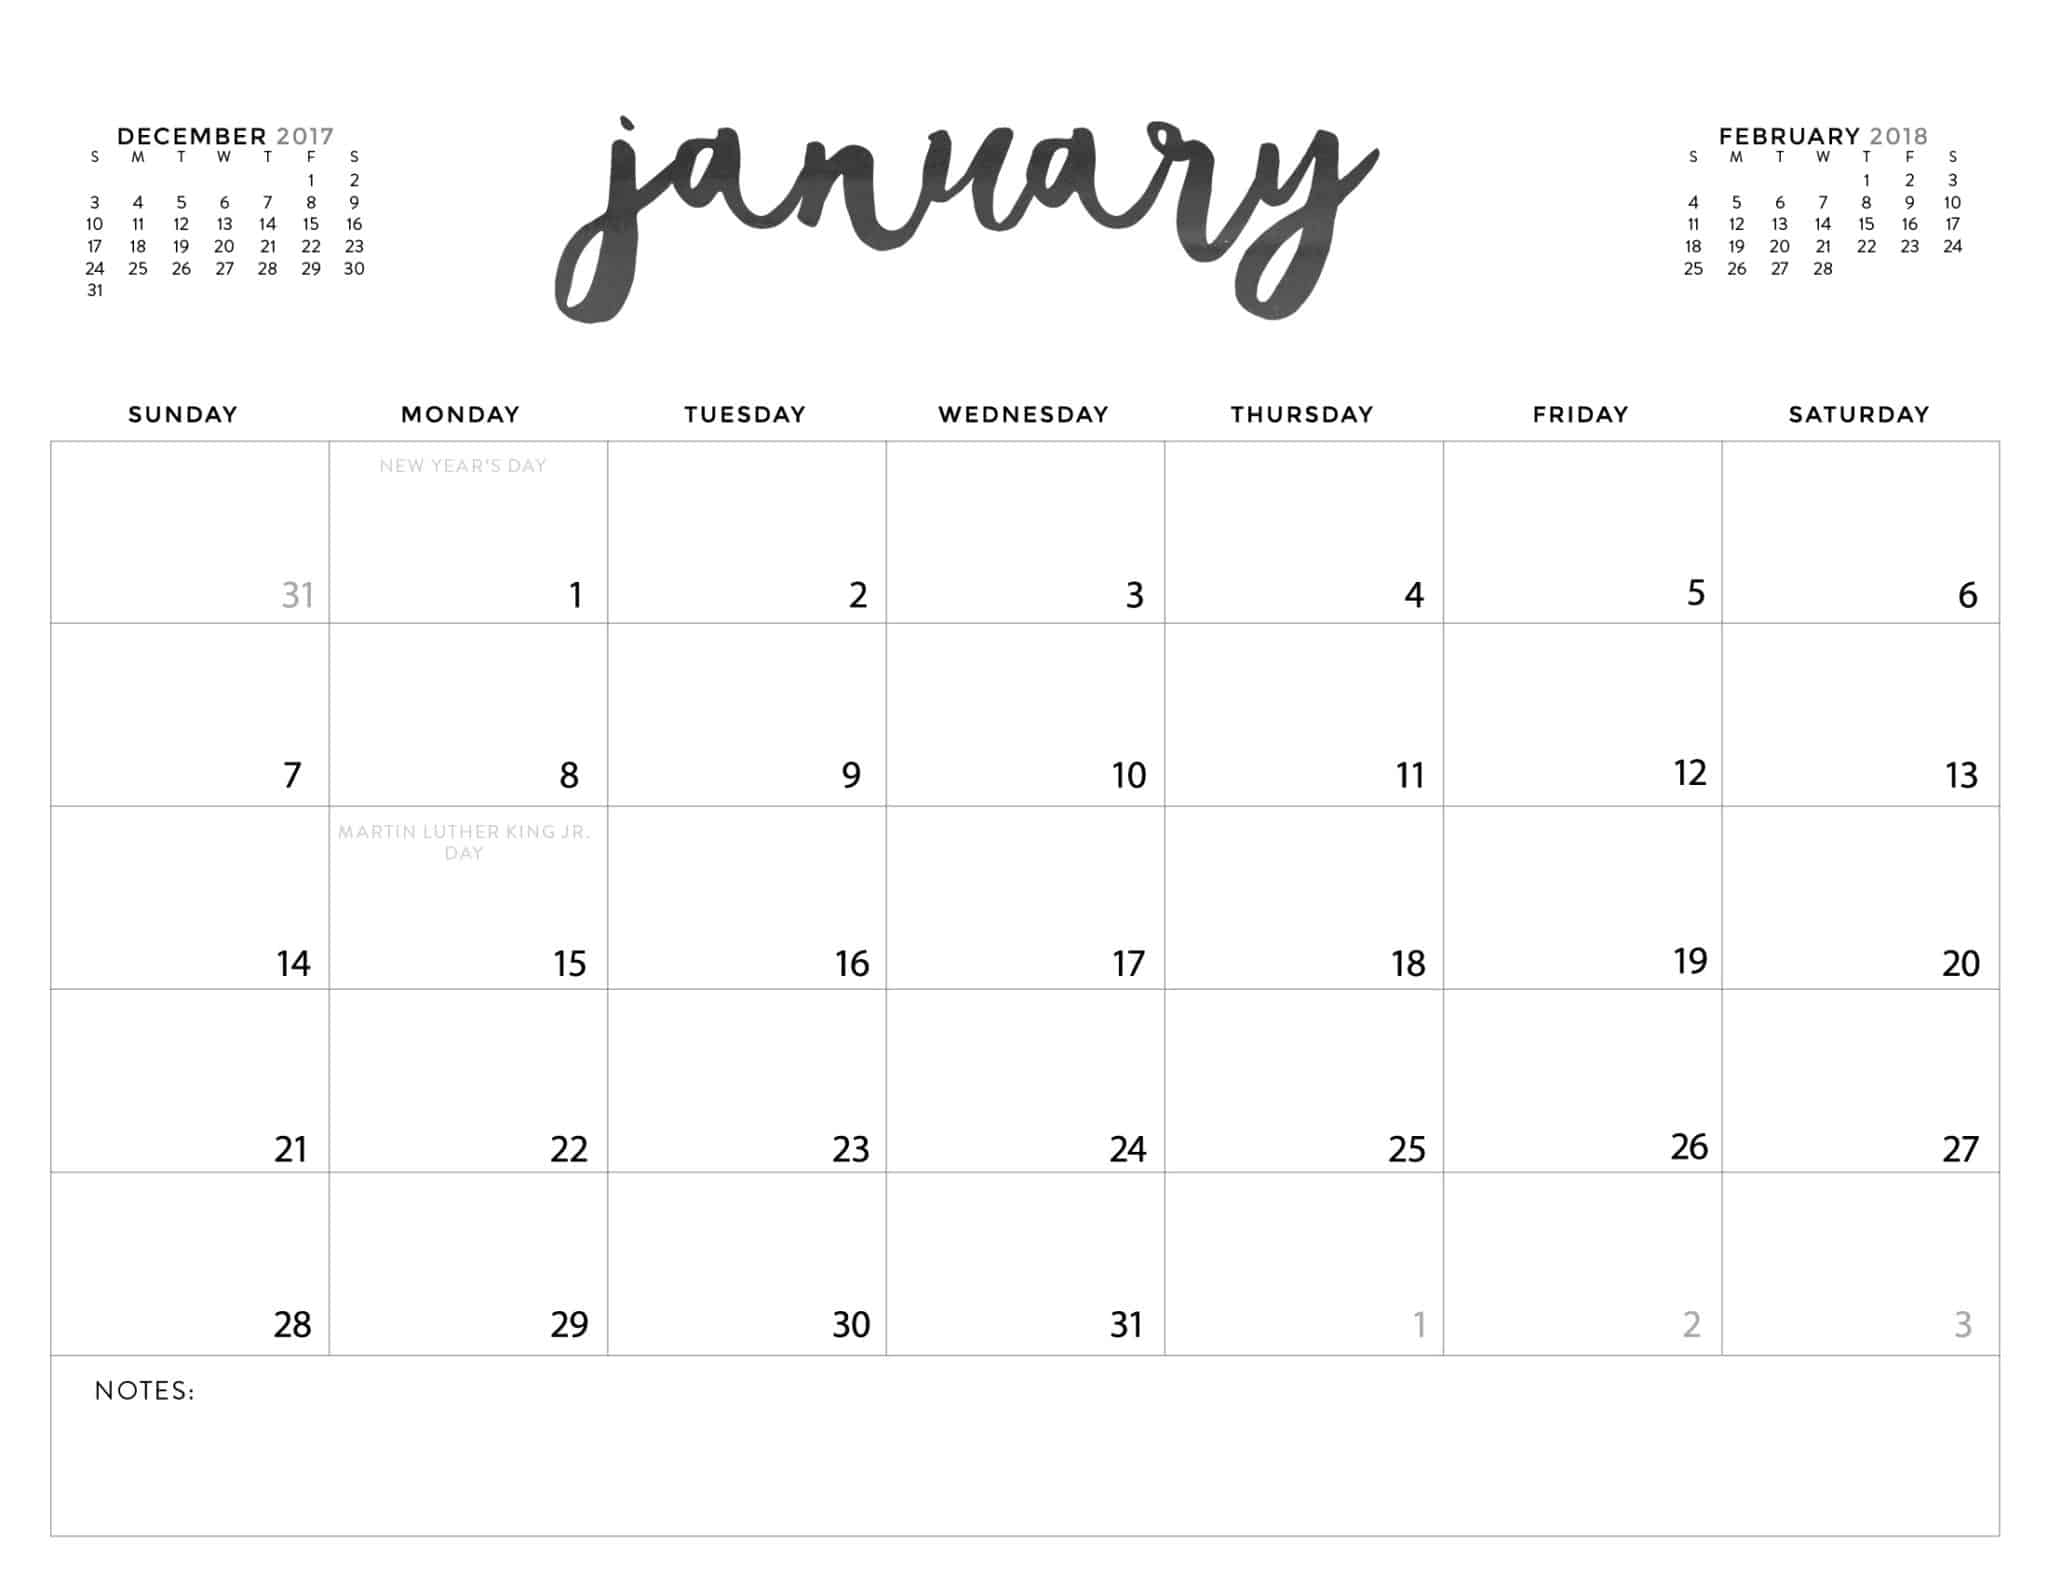 Download Your Free 2018 Printable Calendars Today! 28